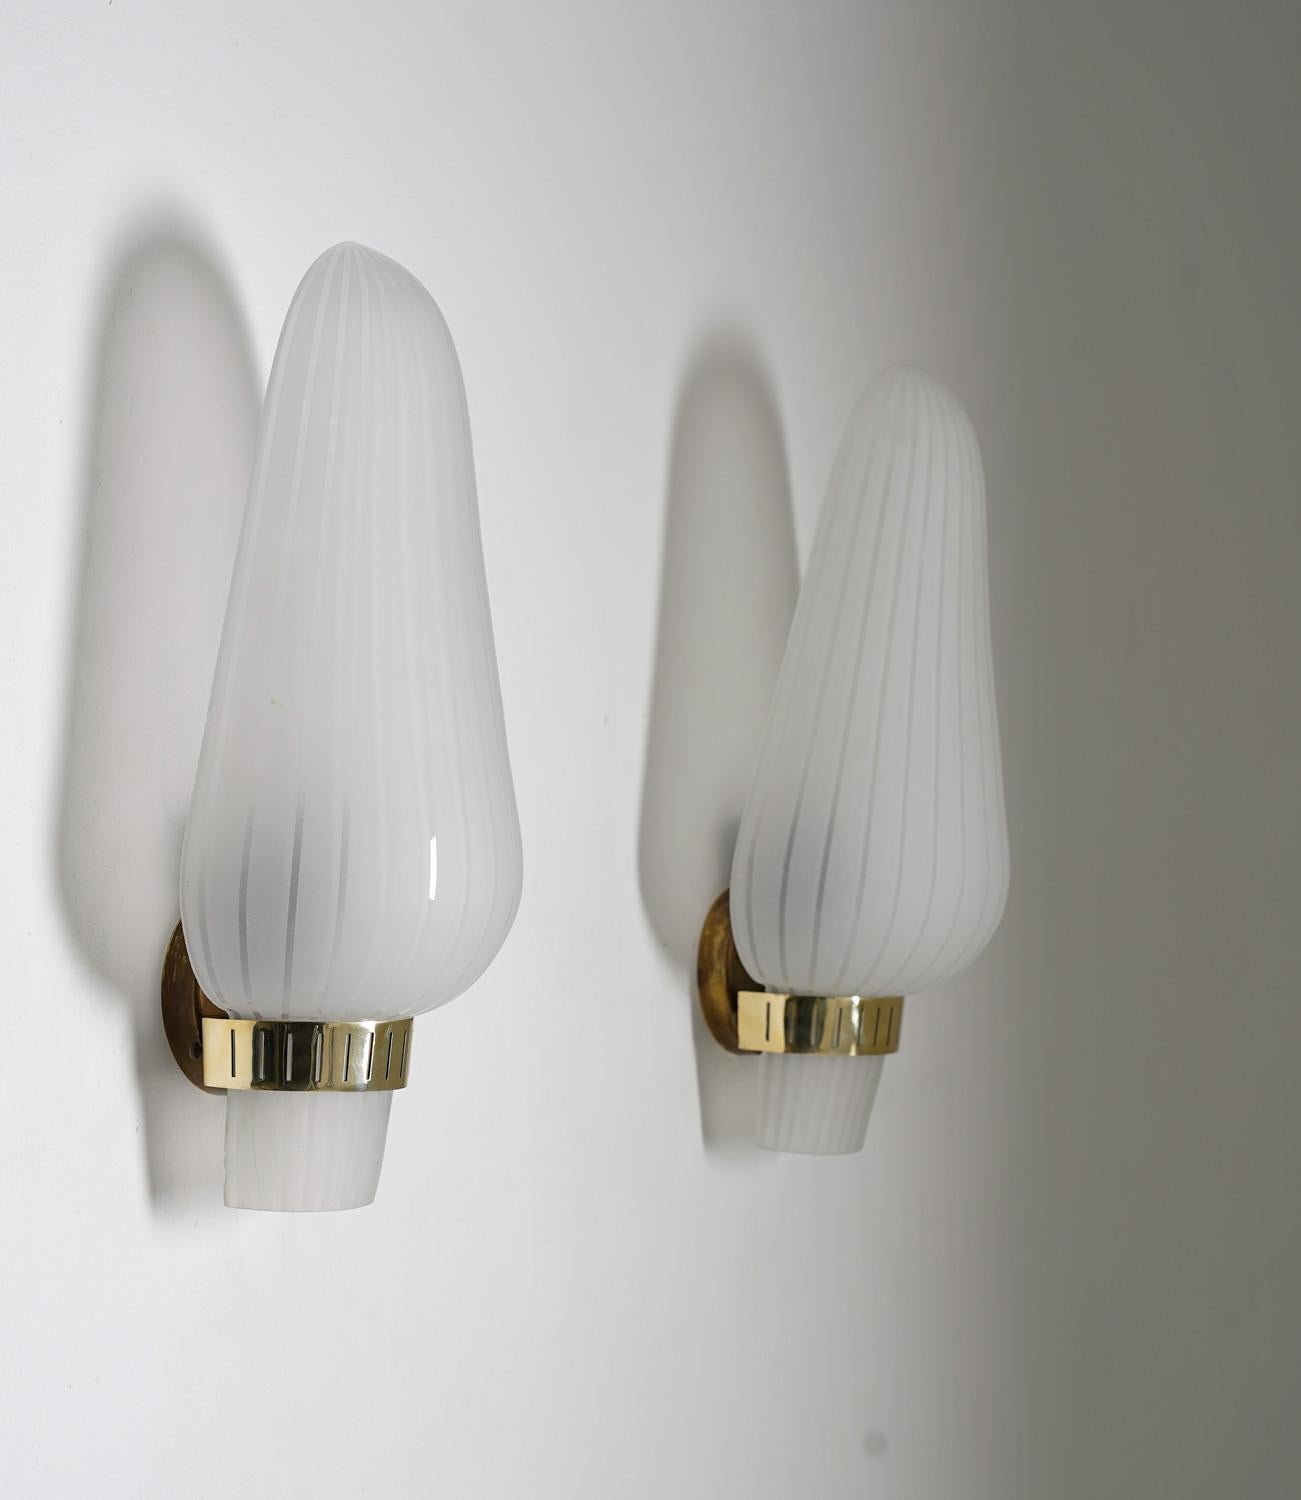 Pair of wall lights/sconces model 8705 by Böhlmarks, 1940s.

Each lamp features one light source, hidden by a large frosted glass shade. The shades are kept in place by a perforated brass holder

Condition: Good condition apart from a few small